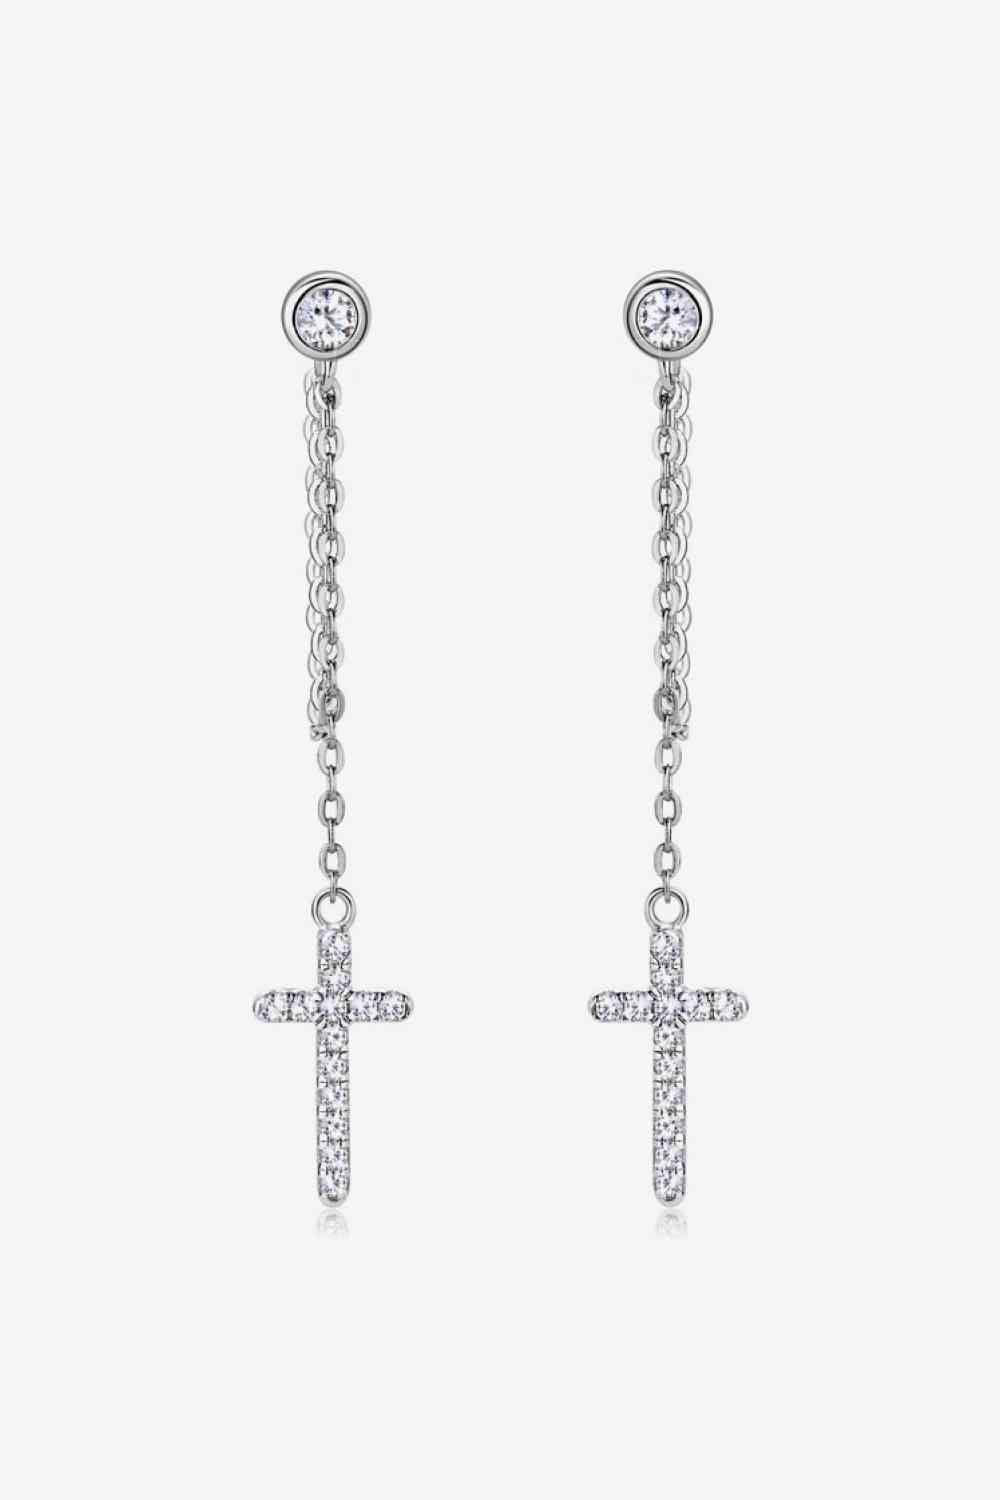 a pair of earrings with a cross on it